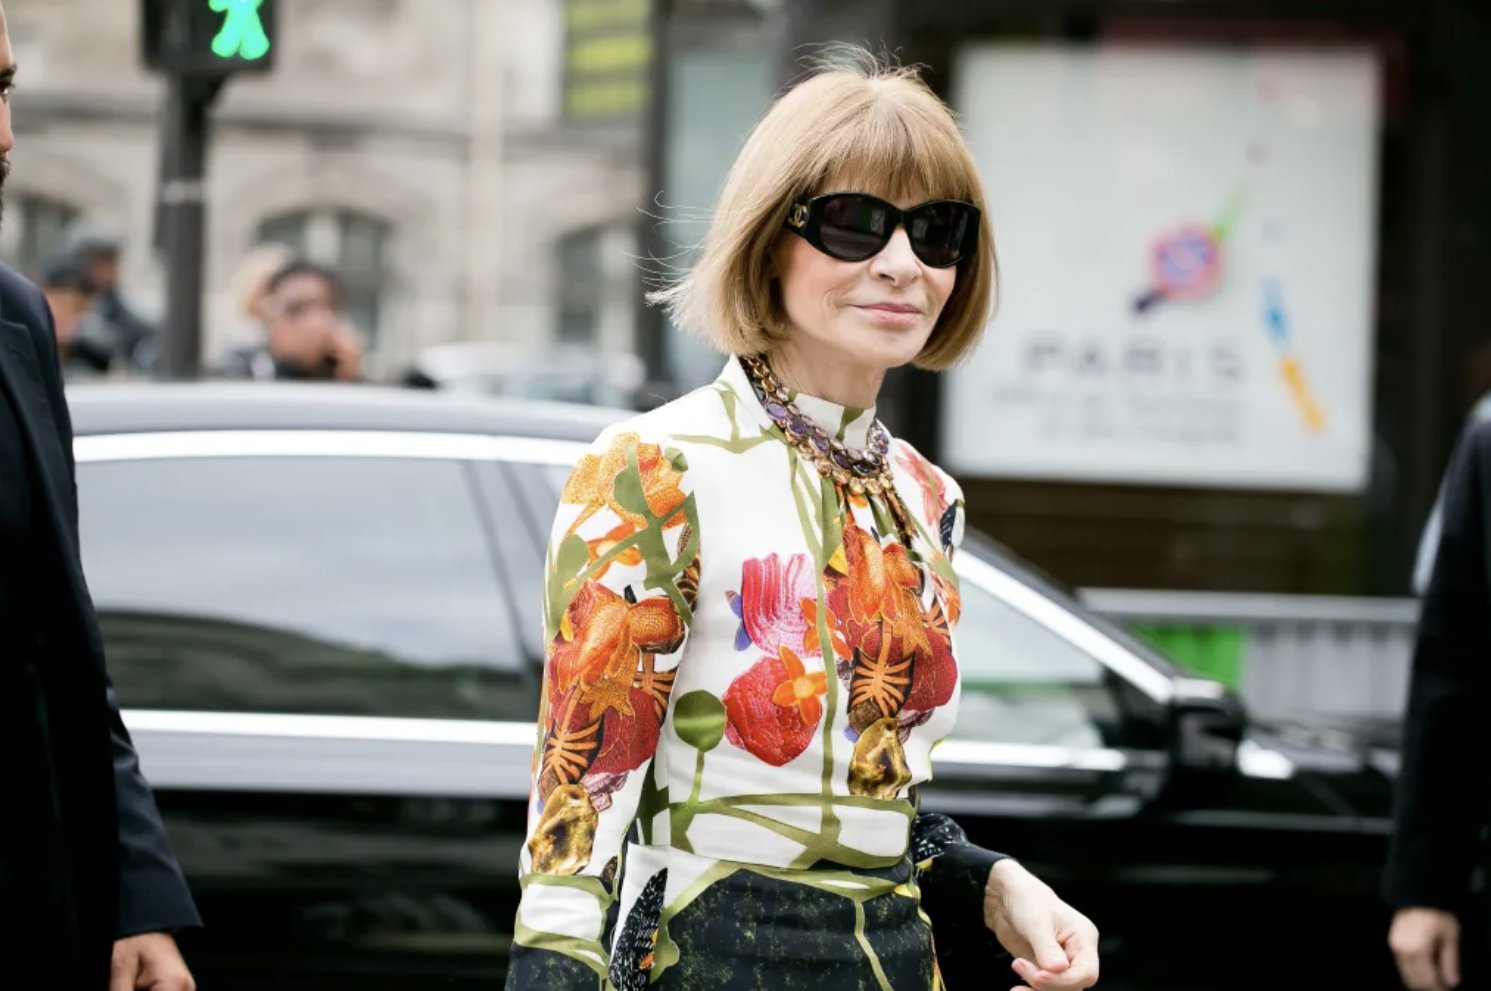 Even the Queen can't make Anna Wintour part with her sunglasses | Mashable